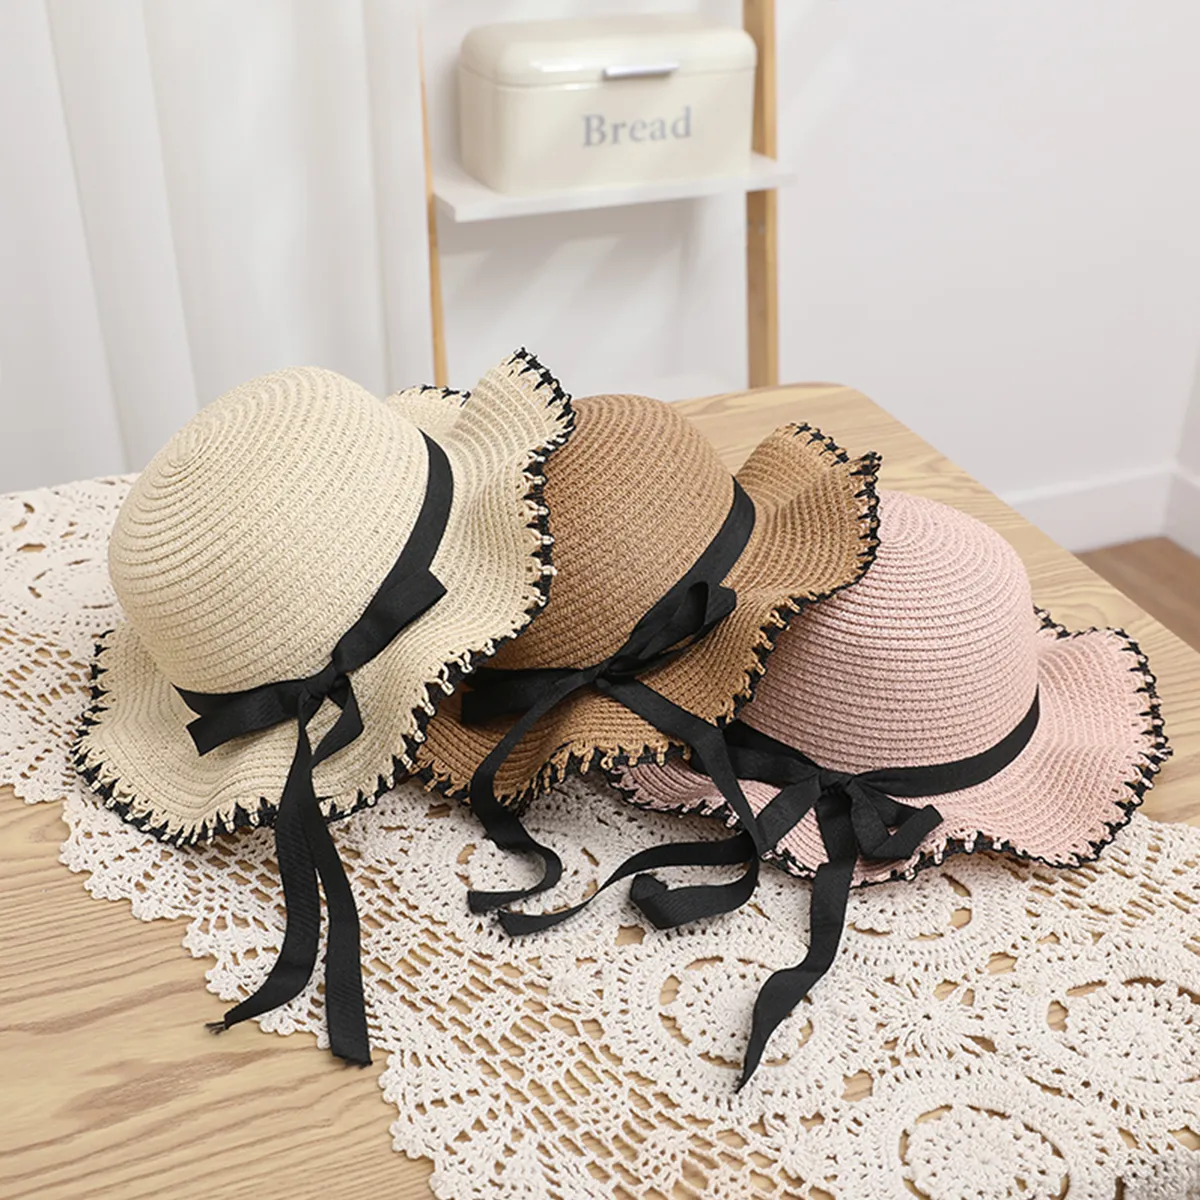 Woven Edging Straw Hat with Bow for Mommy and Me Pink big image 1